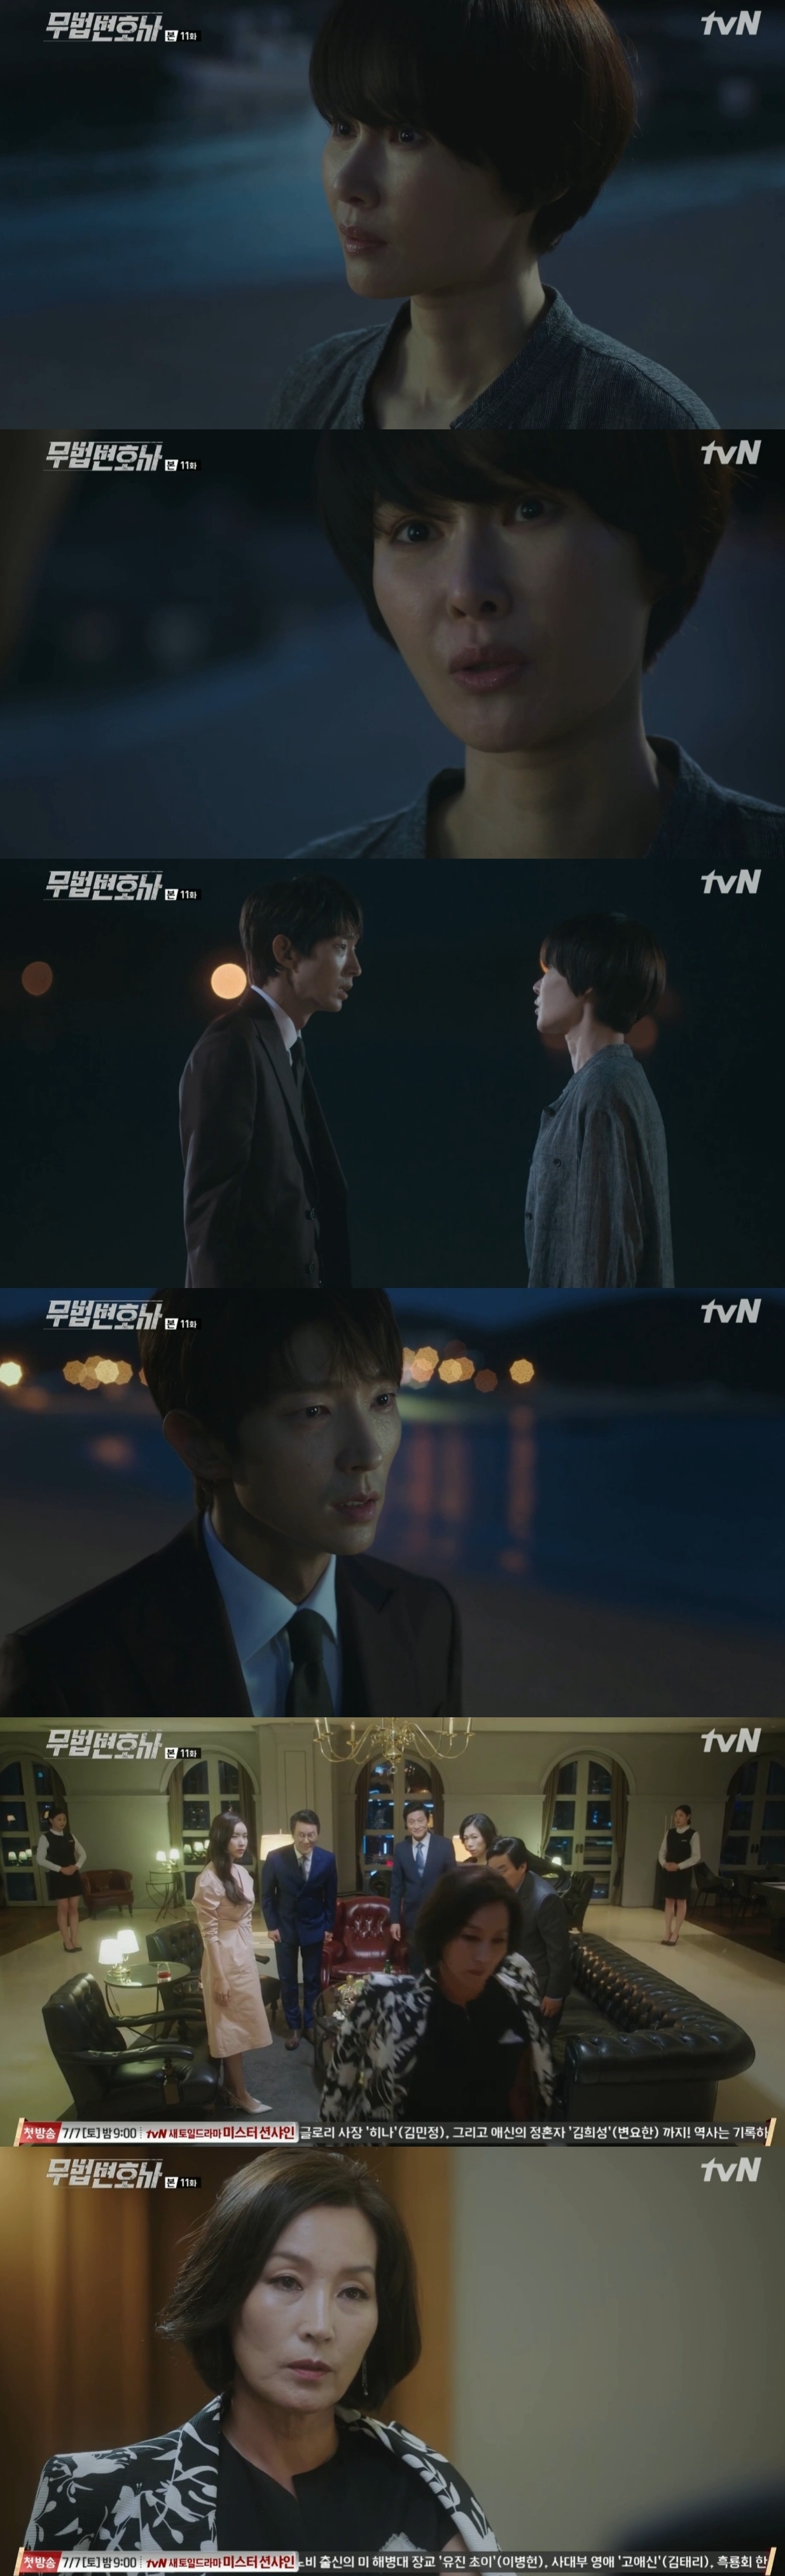 Seoul = = Baek Ju-hee appealed to Lee Joon-gi with tears.In TVN Lawless Lawyer, which was broadcasted at 9 pm on the 16th, Bong Sang-pil (Lee Joon-gi), who proved his innocence by testimony by Ahn Oh-ju (Choi Min-soo), was portrayed.The interests of each other were right, said Seo Ye-ji, who explained why he had to hold hands to prove his innocence.Bong Sang-pil and Ha Jae-yi noticed that the cracks began between Cha Moon-sook (Lee Hye-young) and An Oh-ju. Bong Sang-pil was anxious, saying, I think Cha Moon-sook is moving in a plan.In the end, Ha Jae-yi decided to visit Cha Moon-suk and check it out.If your mother is alive, can you come back to the old Hajae, or is it not because of the Bongsang Pil?Ha Jae-yi was angry at Cha Moon-sook, who was trying to shake him with his mother and Bong Sang-pil, and he did not shake and warned Cha Moon-sook and responded strongly.Cha Moon-sook visited An-ohju and asked why he came to court. An-oh said, I received it on the day of the trial with a threatening phone call. 18 years ago, An-oh and Cha Moon-sook released photos.All the actions I do are loyal to protecting the judge, he said, referring to Bong Sang-pils likely photo.Bong asked Noh Hyun-joo (Baek Ju-hee) not to meet Jae in the future. Roh said, Thank you, for protecting our daughter.Then Bong recalled his childhood. He was confused by his identity. Roh Hyun-joo cried, It was really great. I resemble my mother a lot.When I return to the ready-made world, I have been in Thailand knowing that my husband and Jae-yi are dangerous. Please pretend not to know for a while.Until now, my lawyer could protect her, but how long will my daughter be safe? I will be sad, but please think it is her heart. I want her to get out of this. 